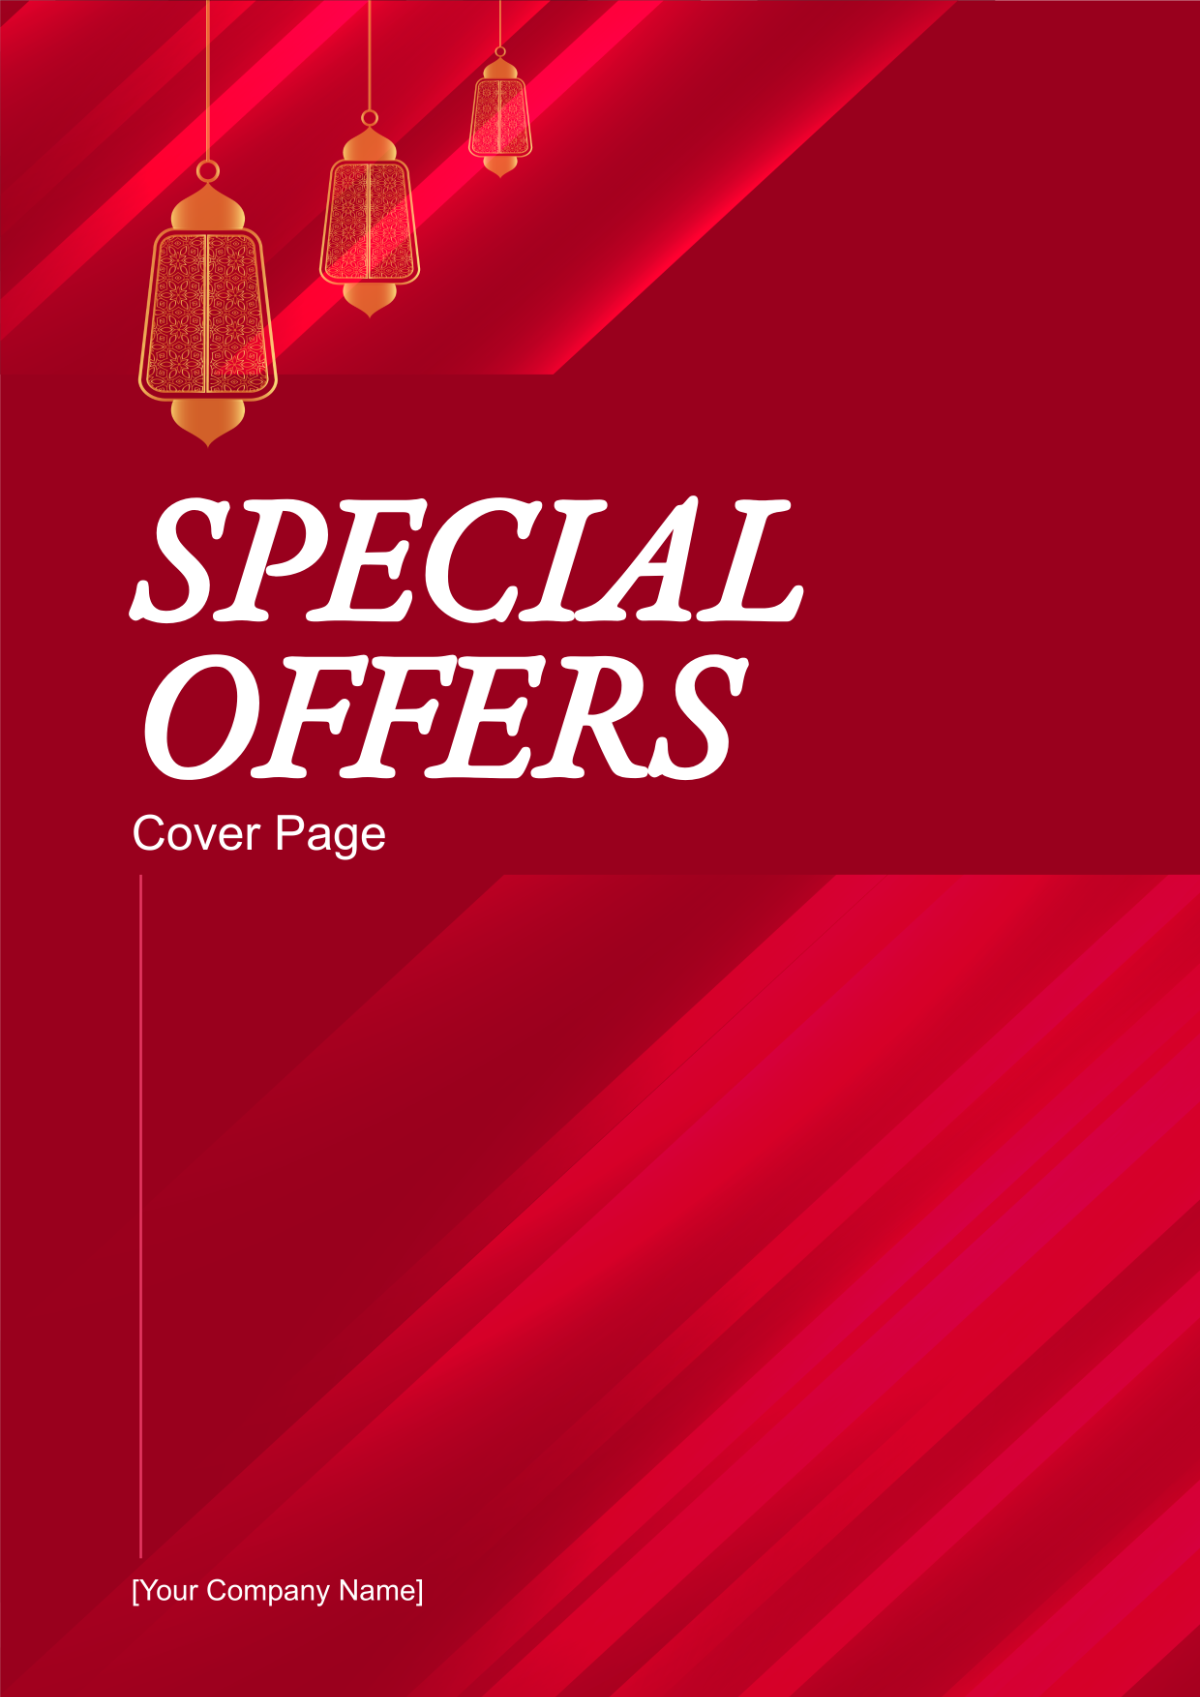 Special Offers Cover Page Template